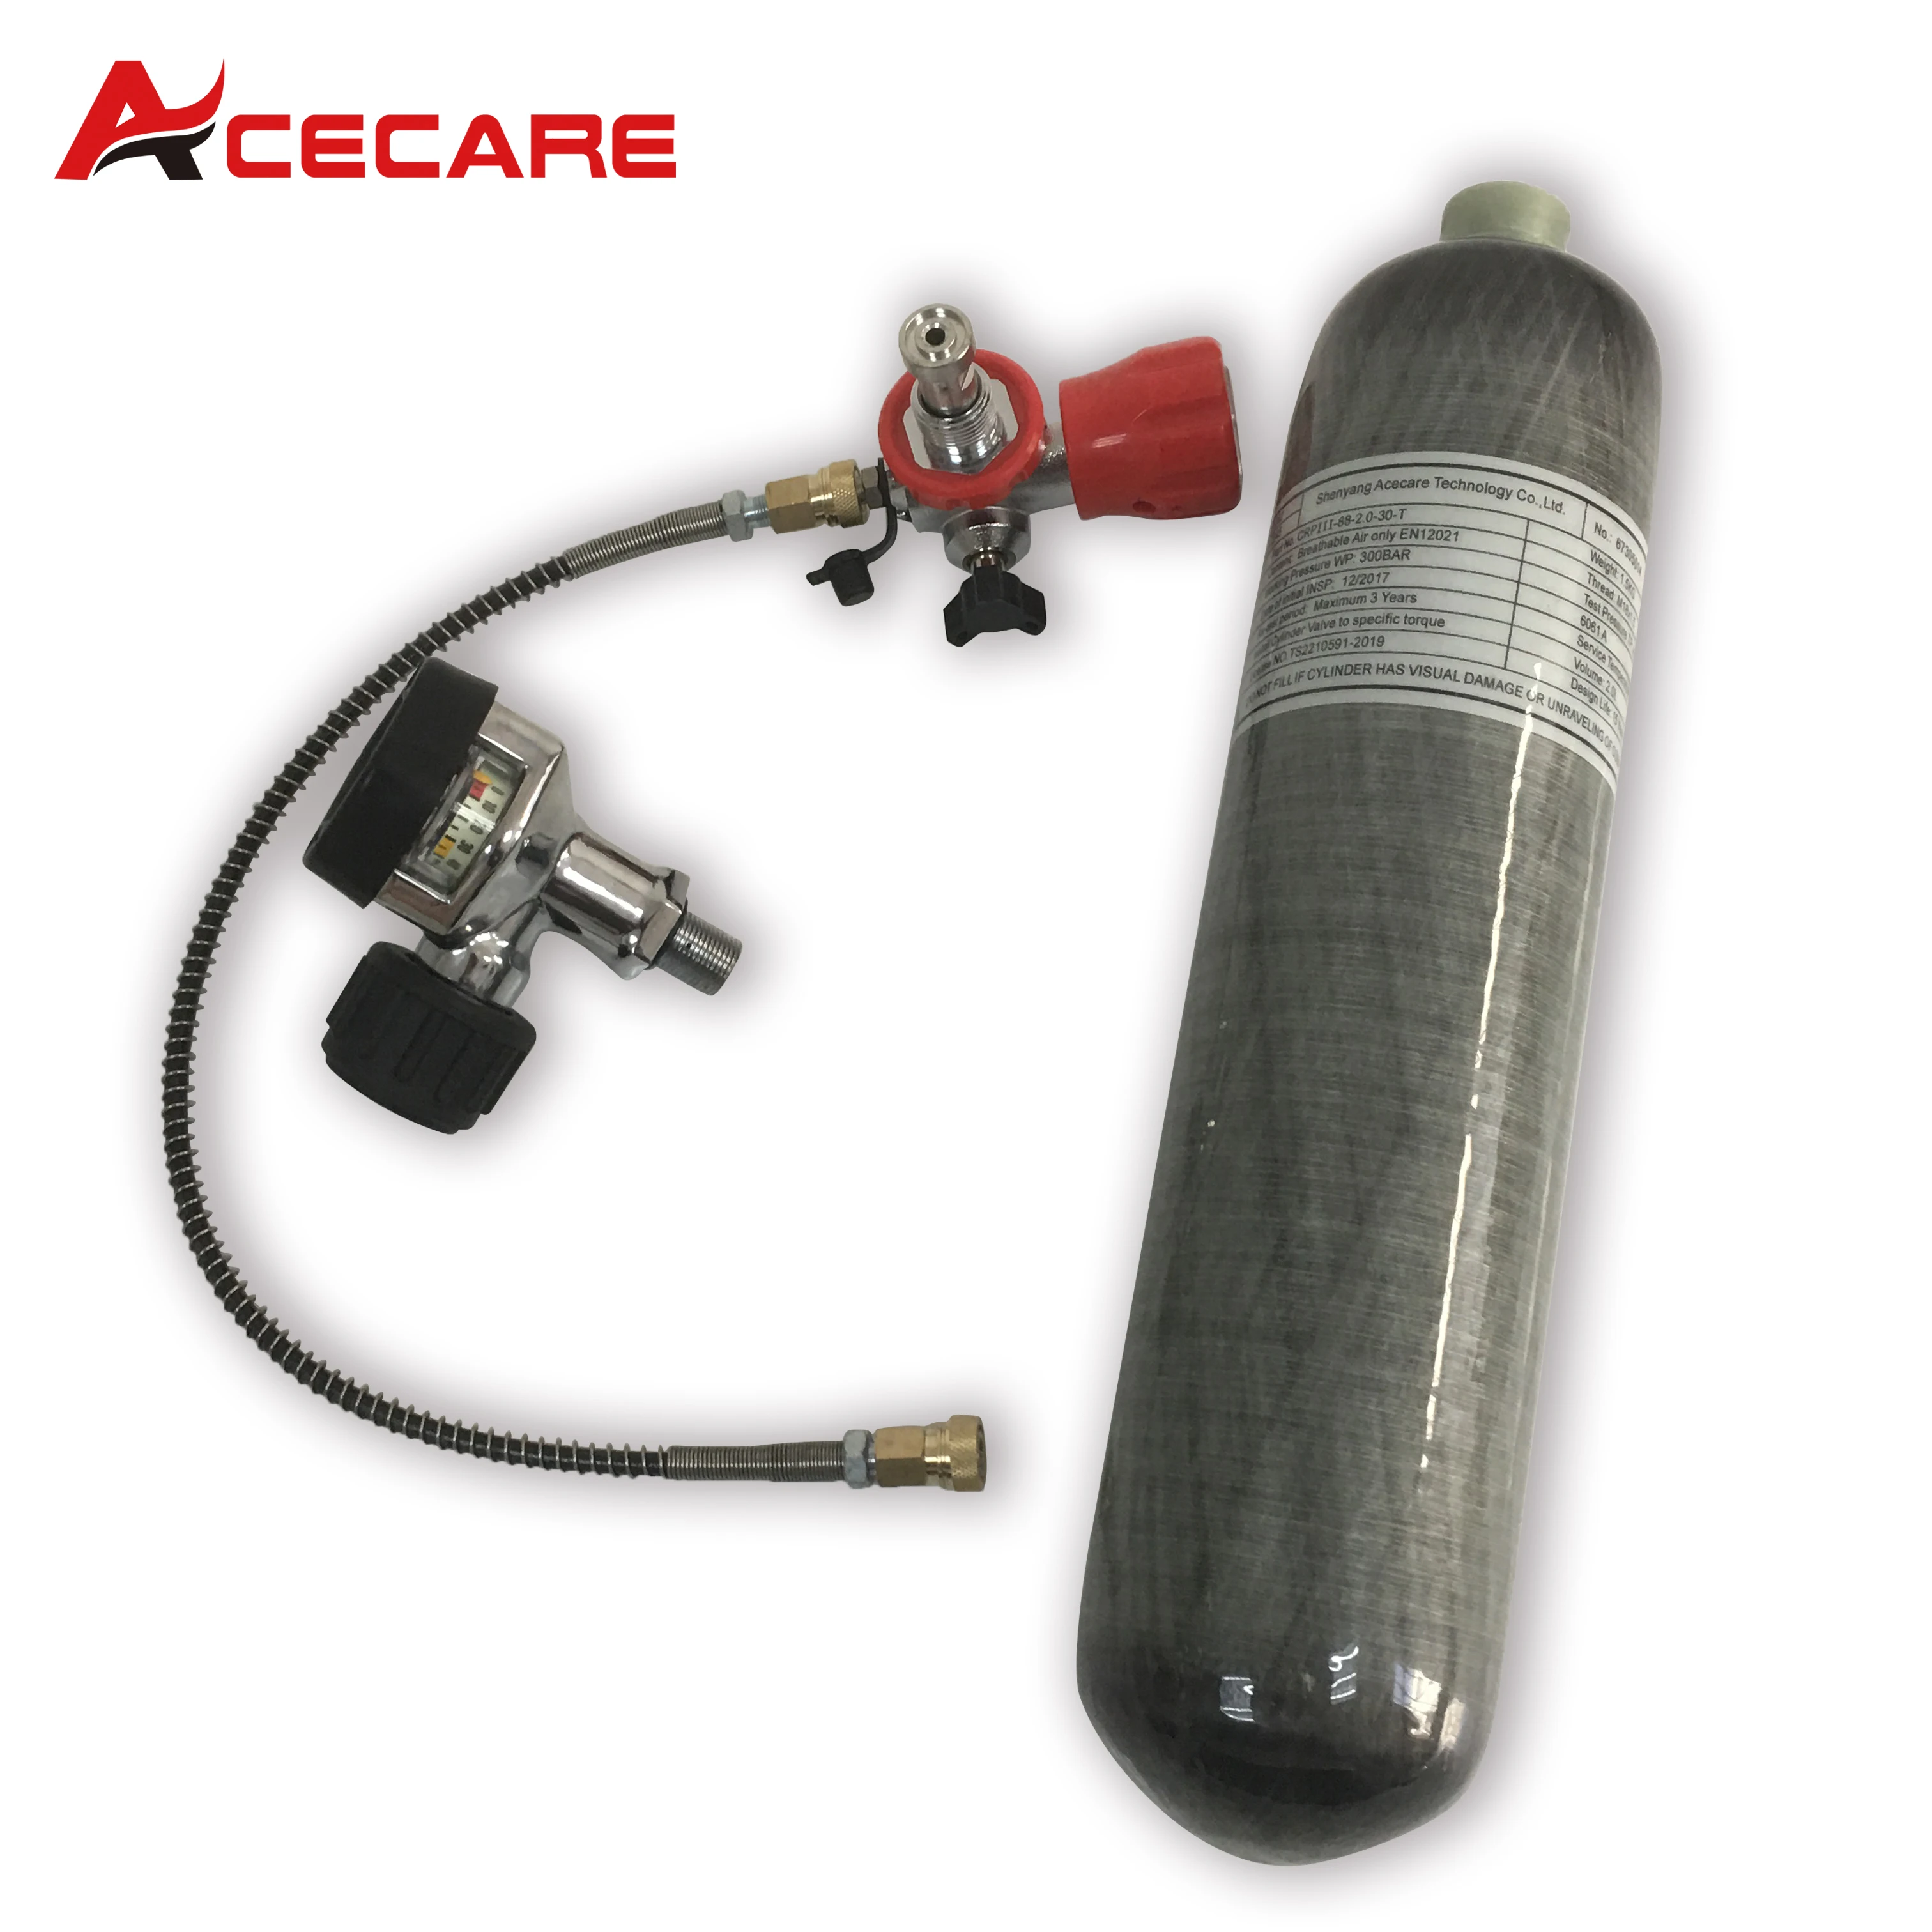 

ACECARE CE 2L Carbon Fiber Gas Cylinder 30Mpa 300Bar 4500Psi With Big Gauge Valves Set For Scuba Diving Ship from RU Directly